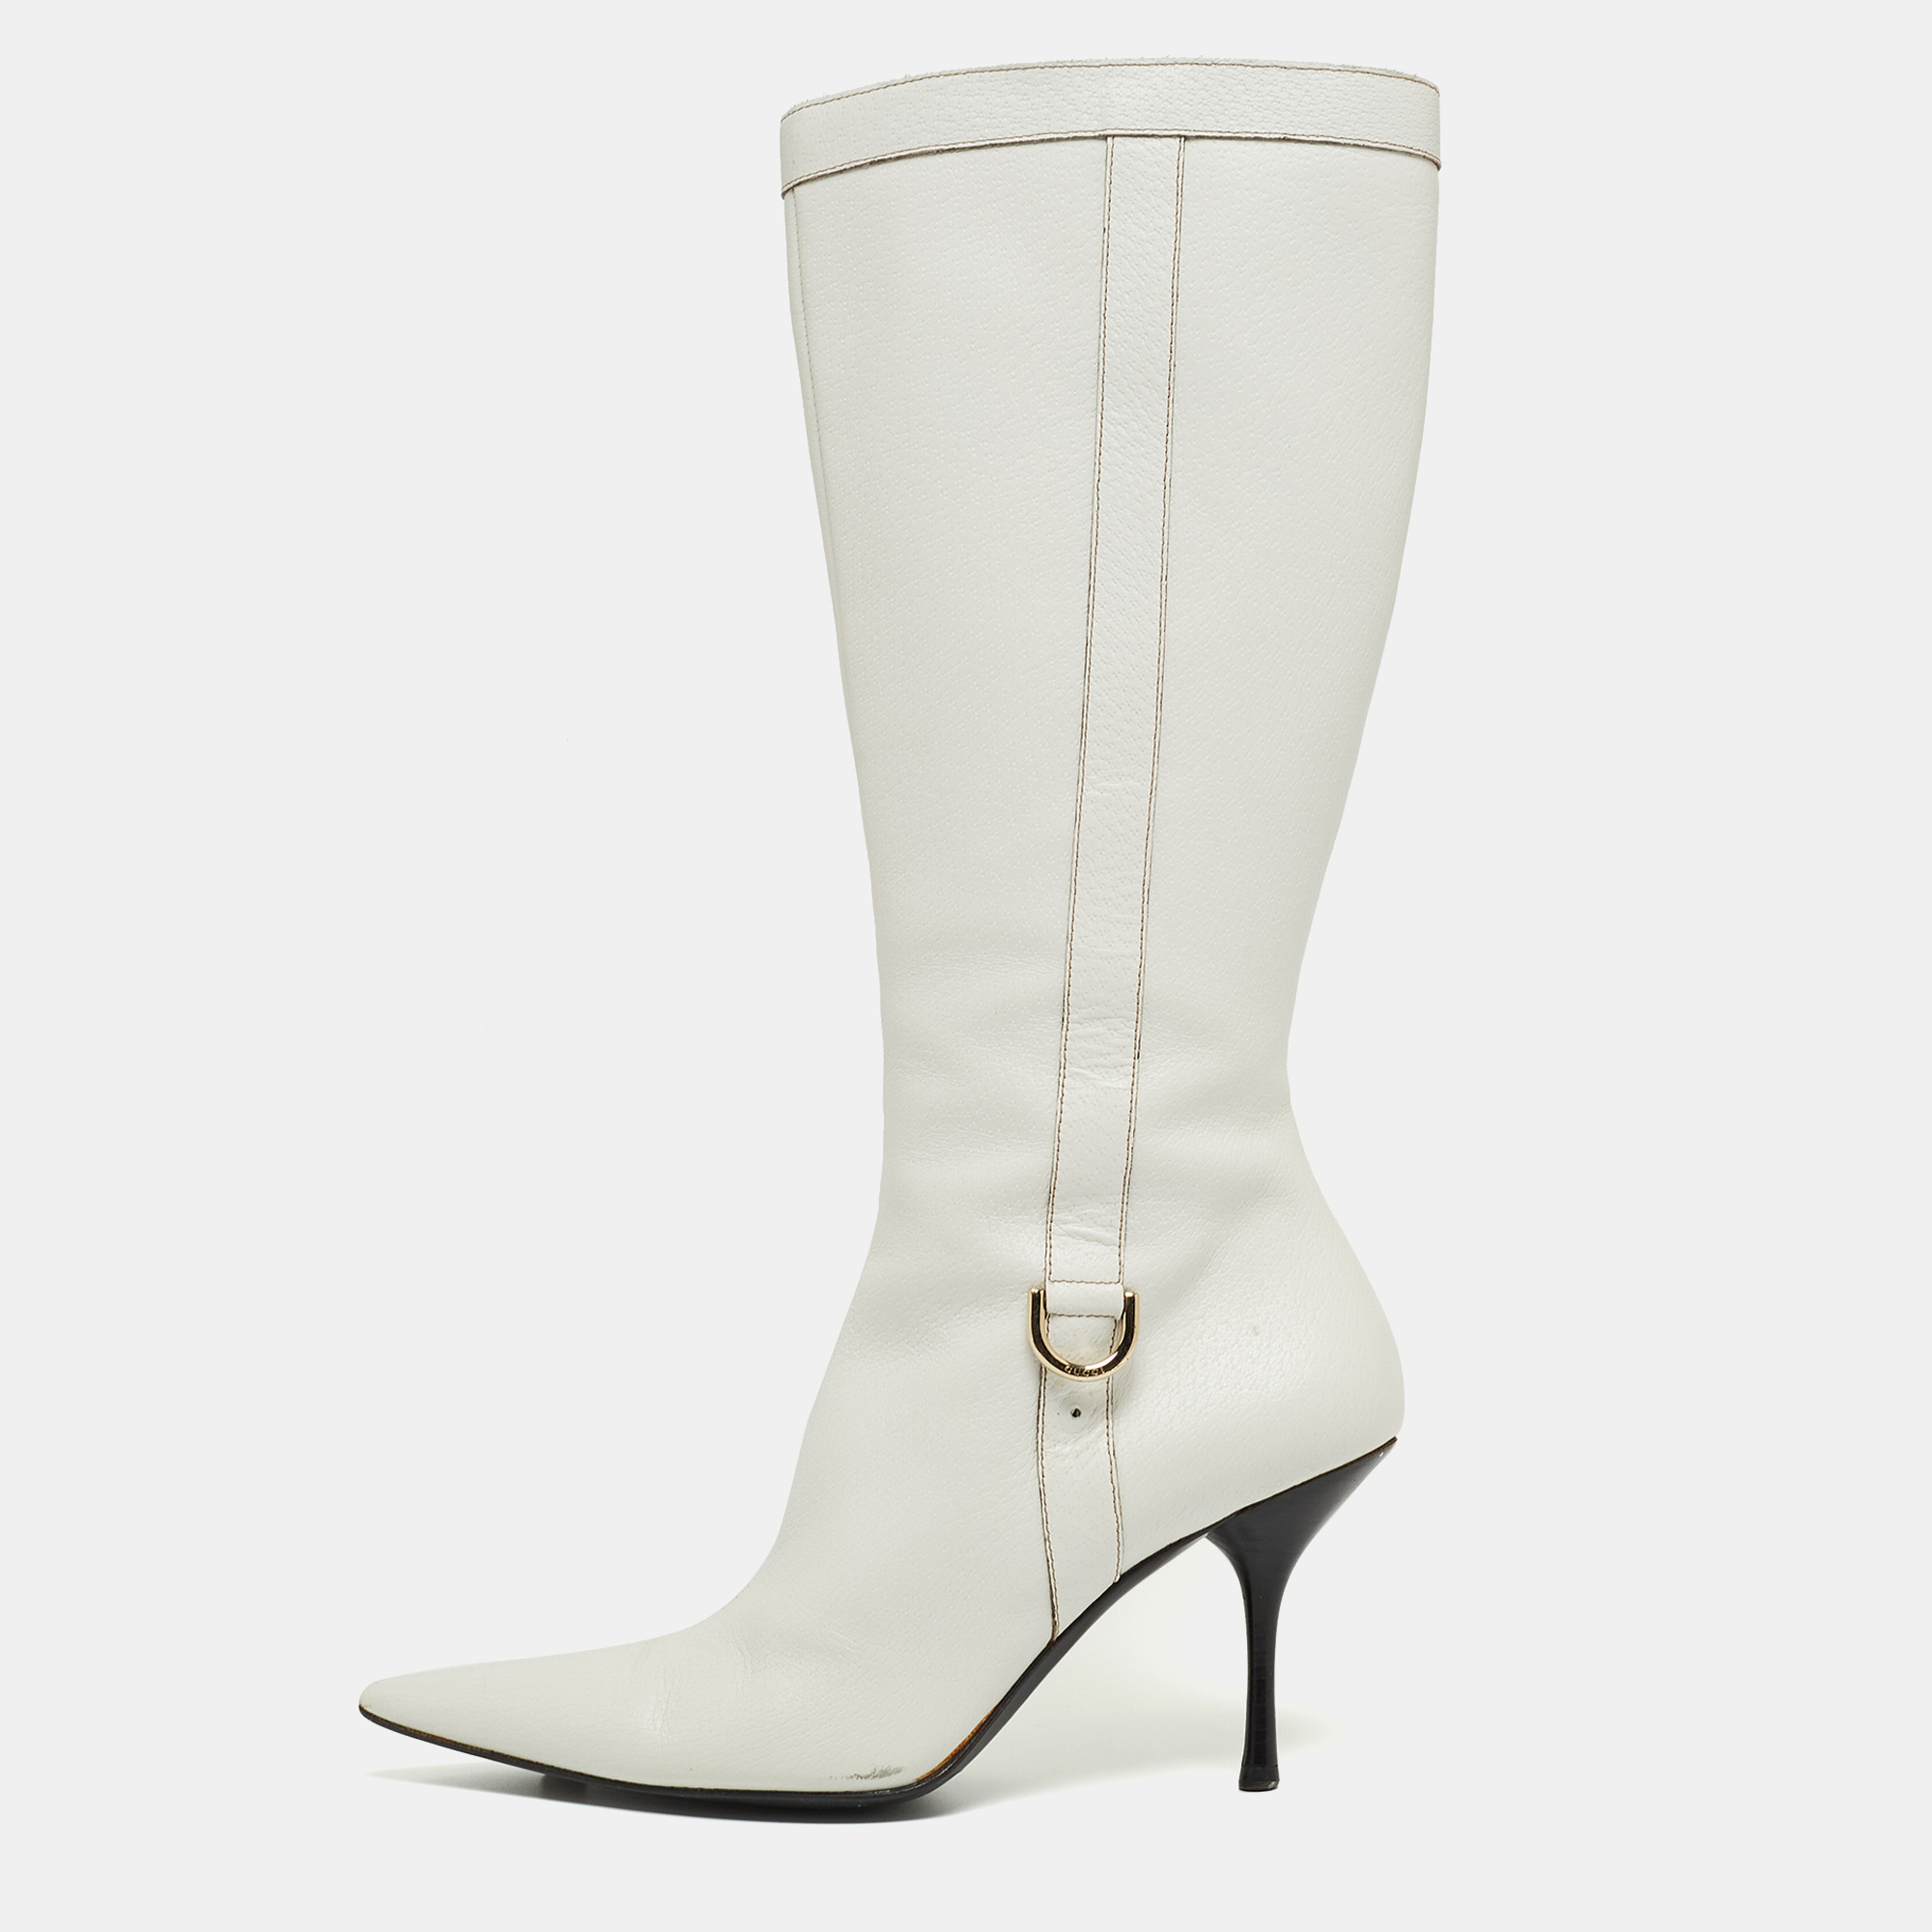 Pre-owned Gucci White Leather Pointed Toe Knee Length Boots Size 41